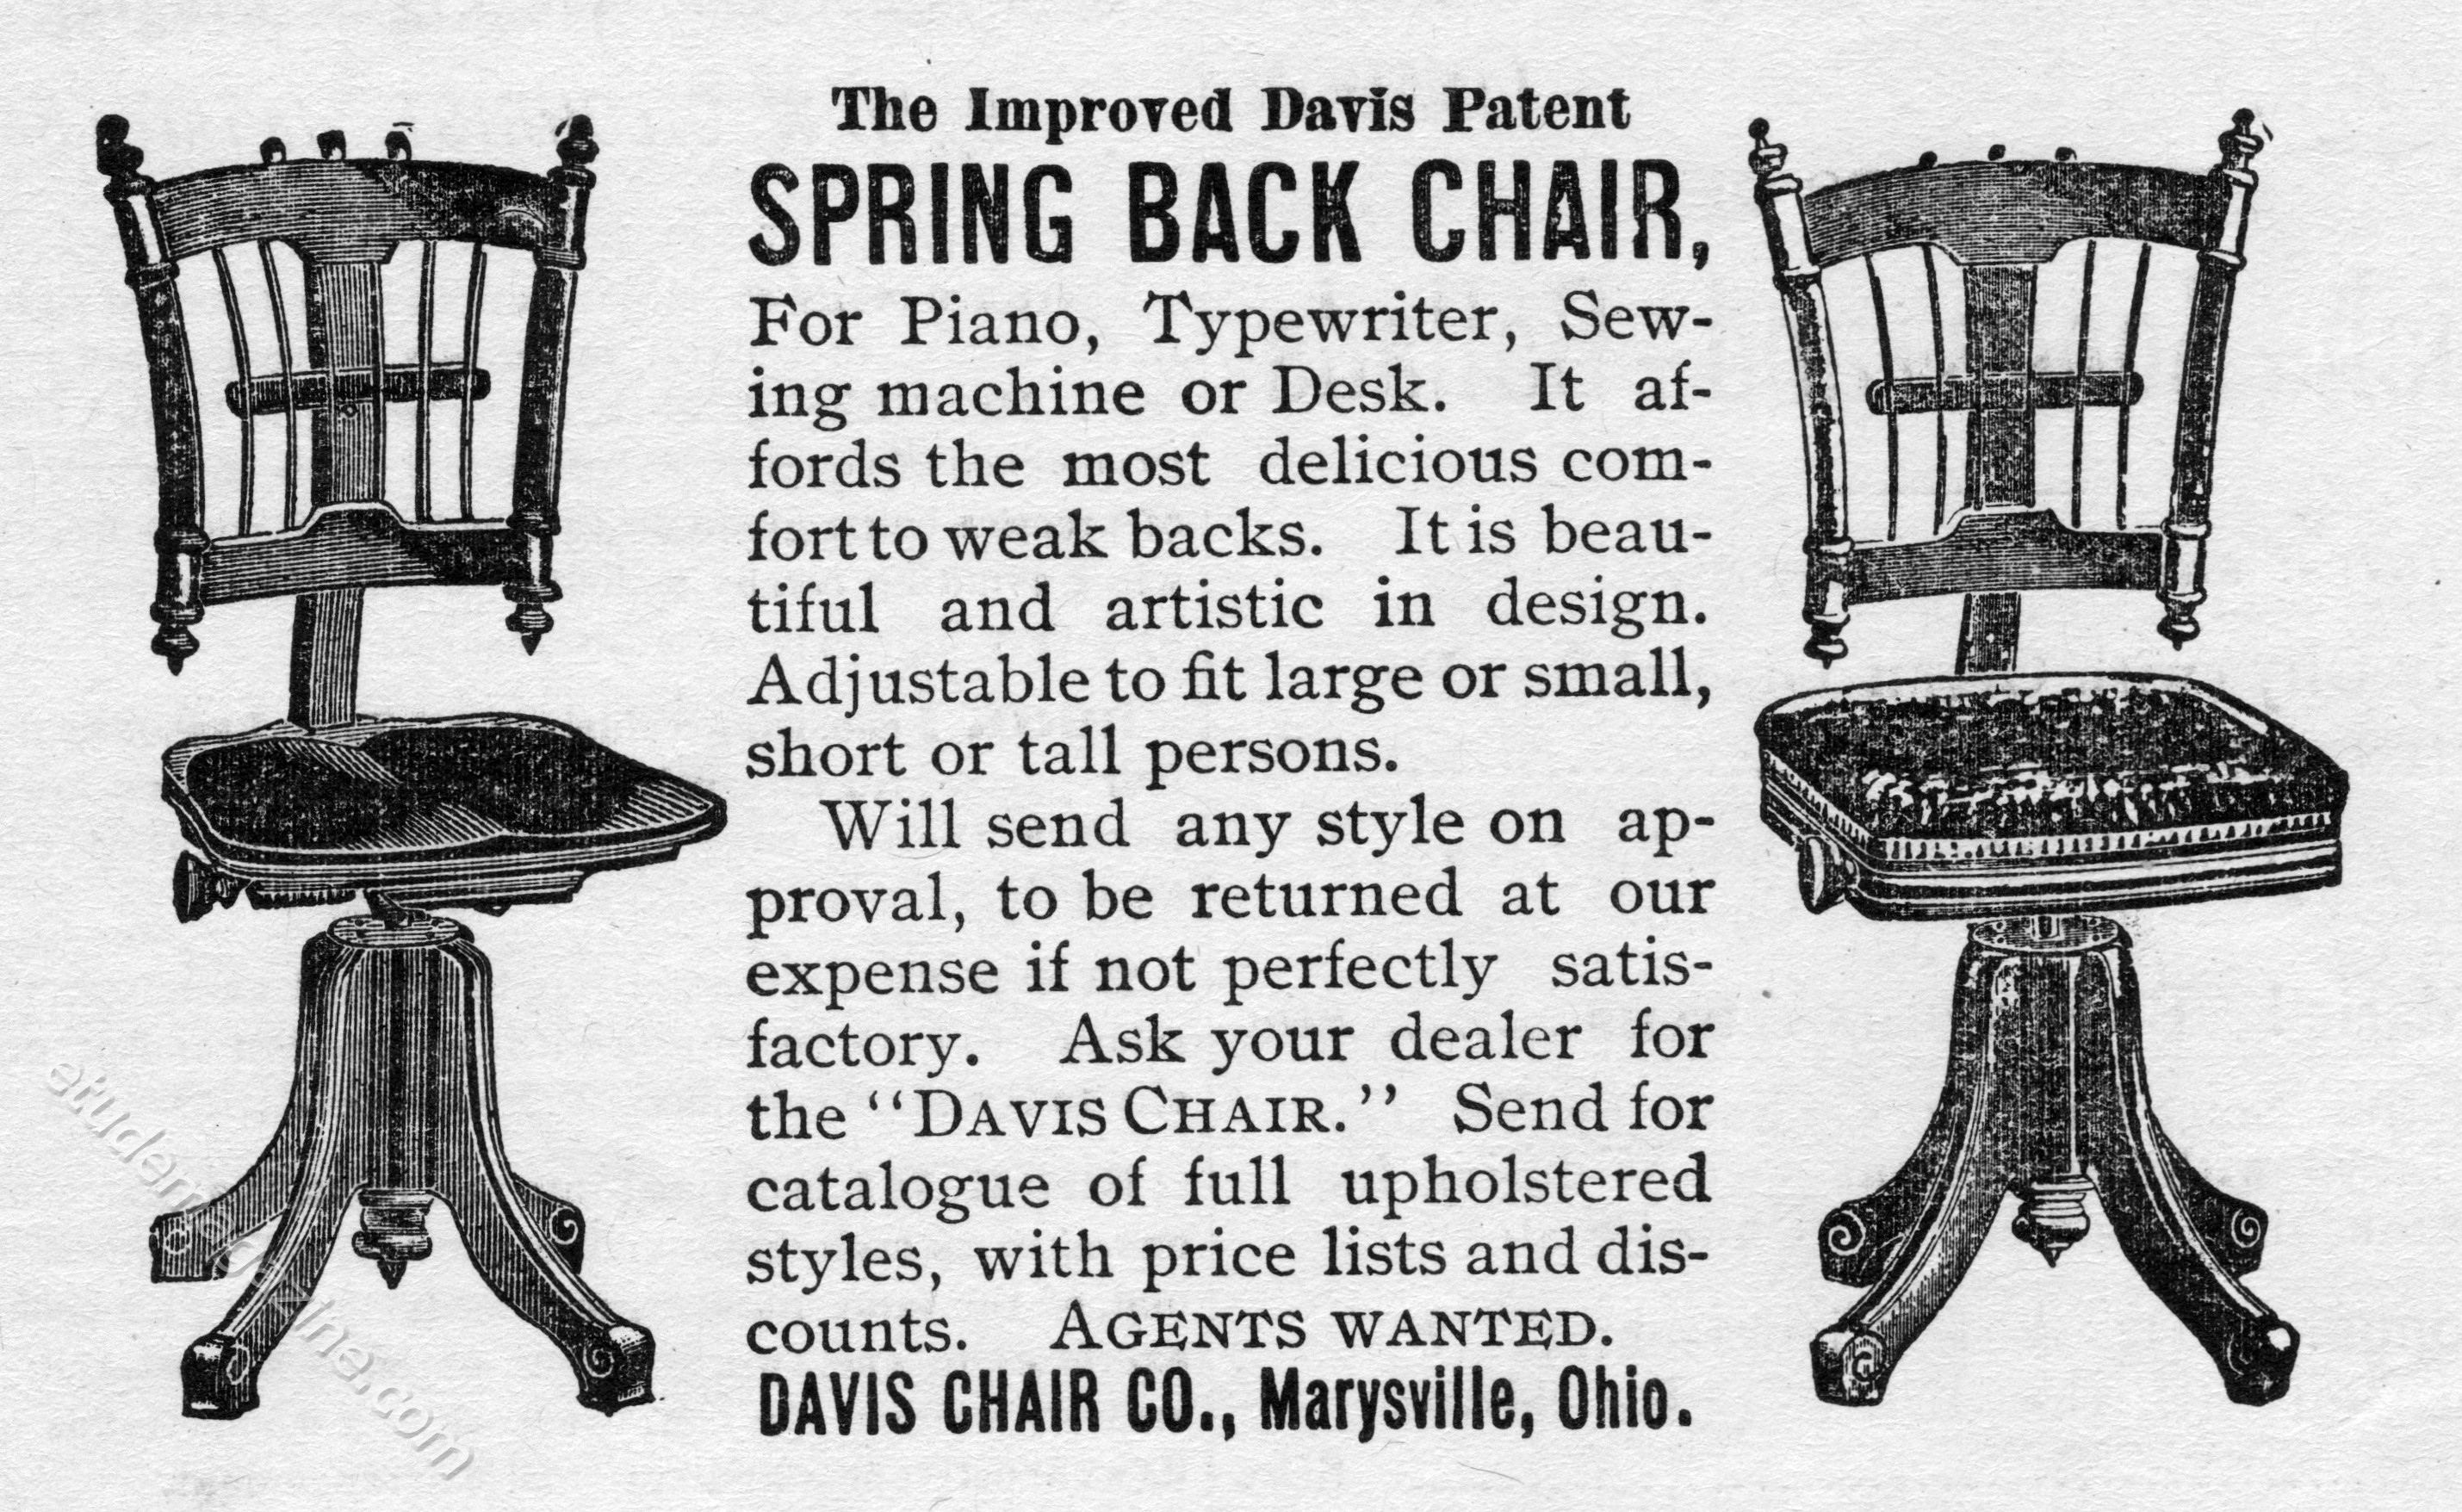 The Improved Davis Patent SPRING BACK CHAIR.